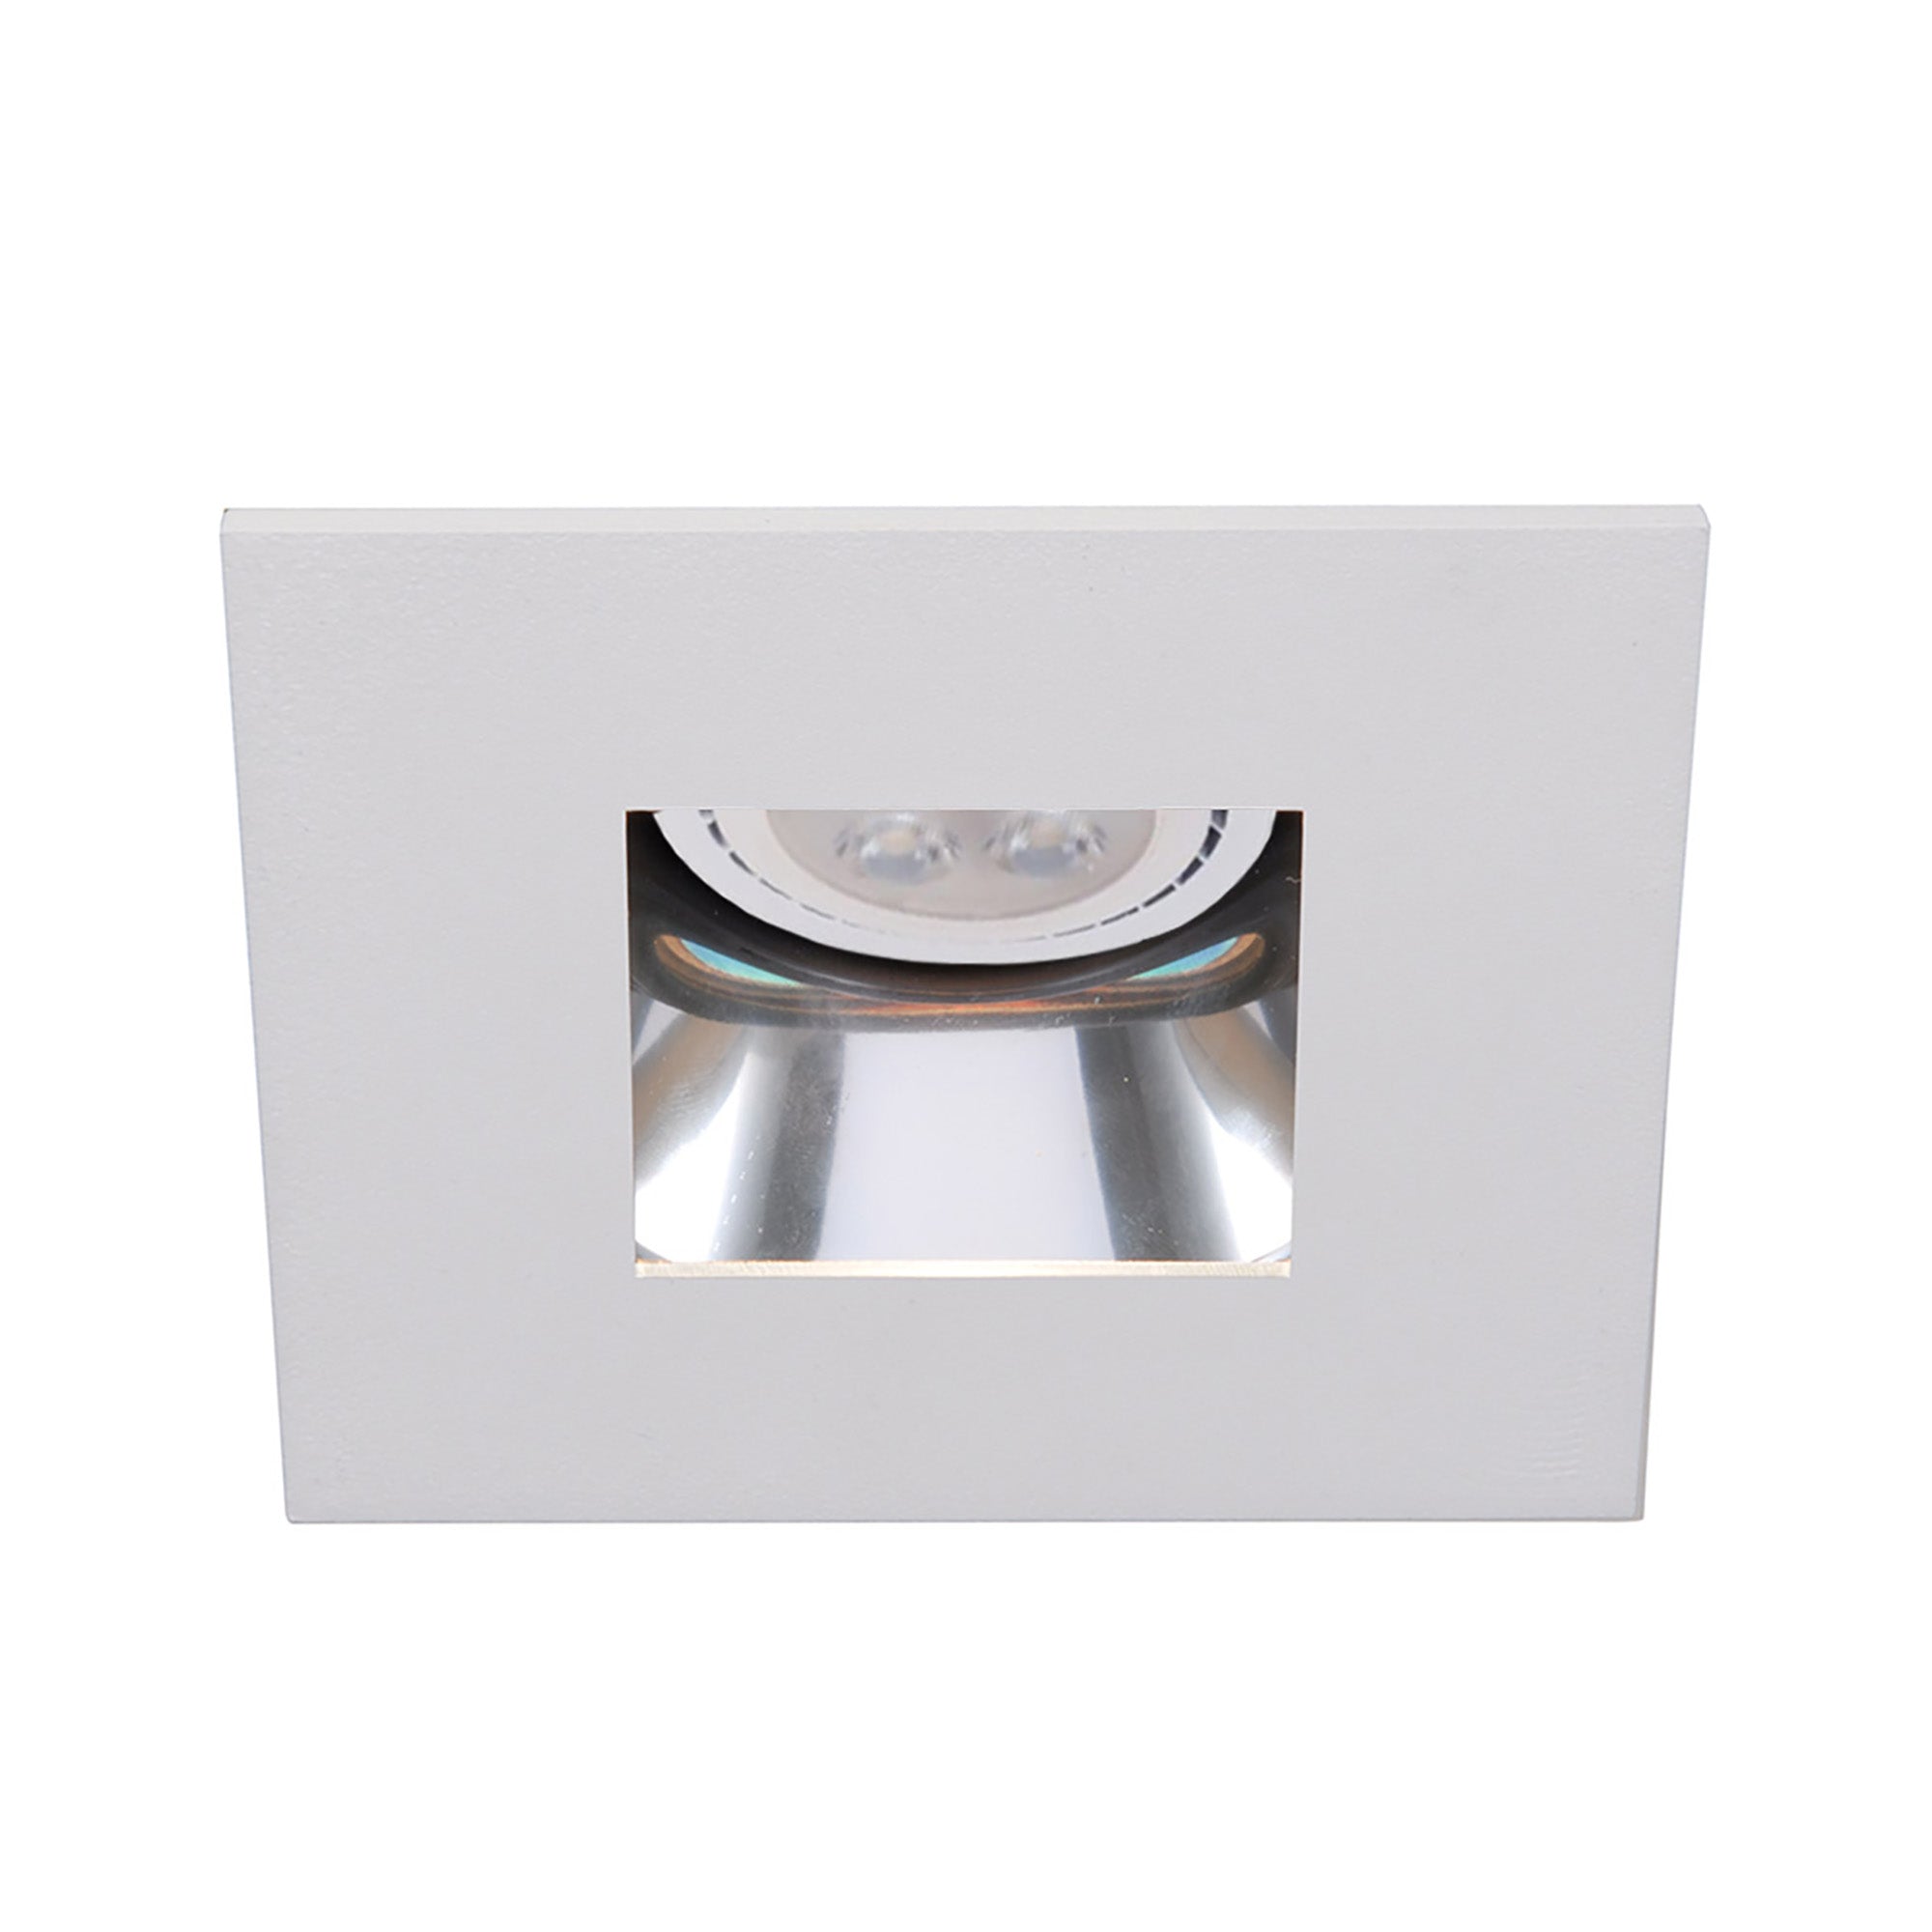 4" Square Adjustable Open Reflector Trim with LED Bulb